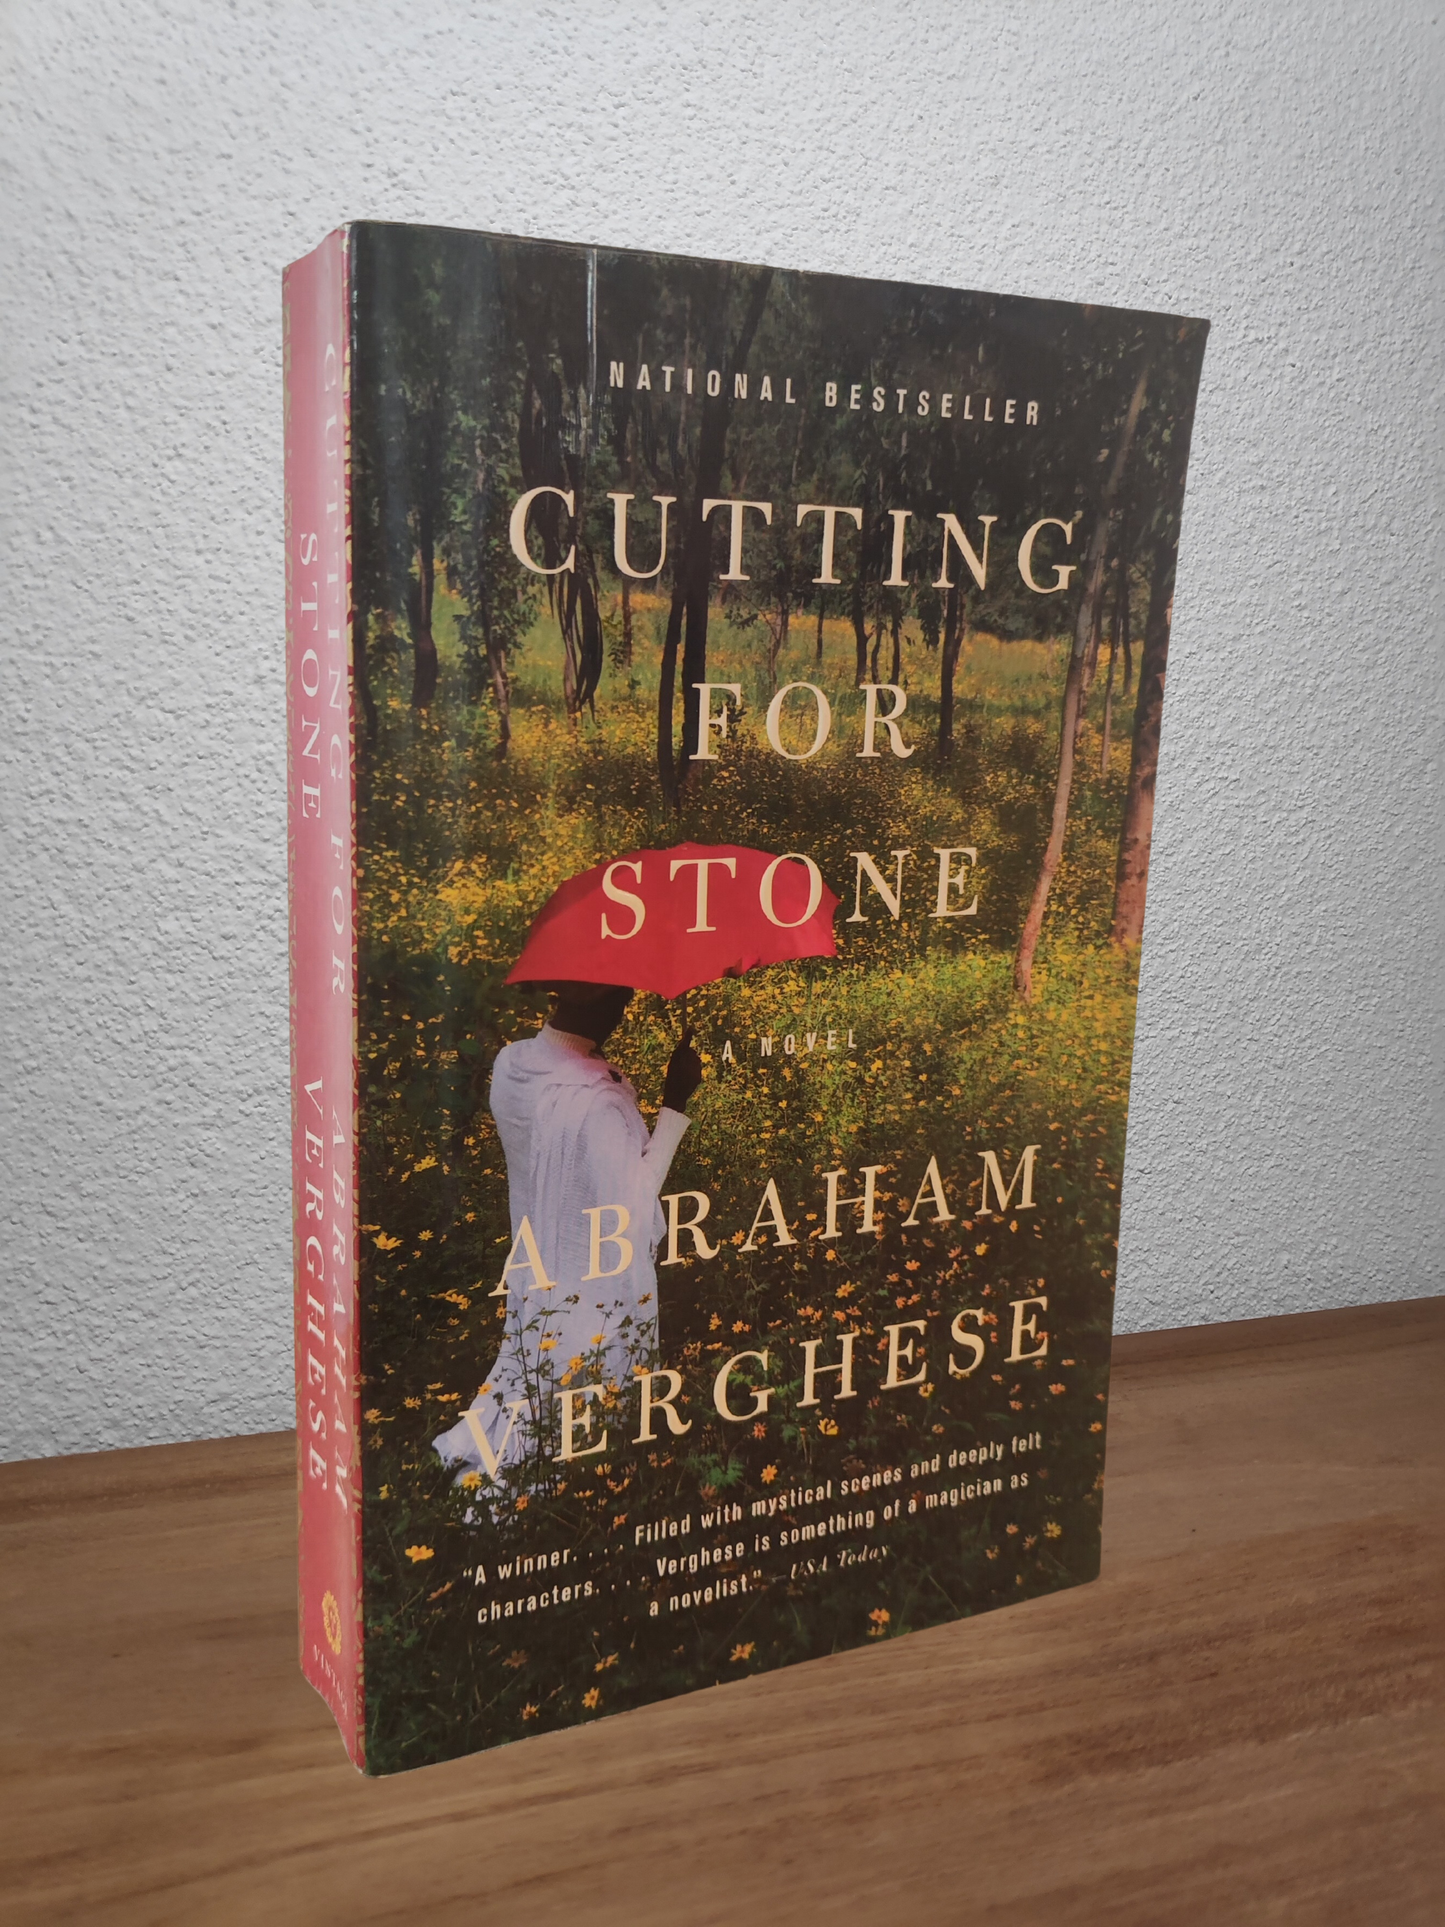 Abraham Verghese - Cutting for Stone